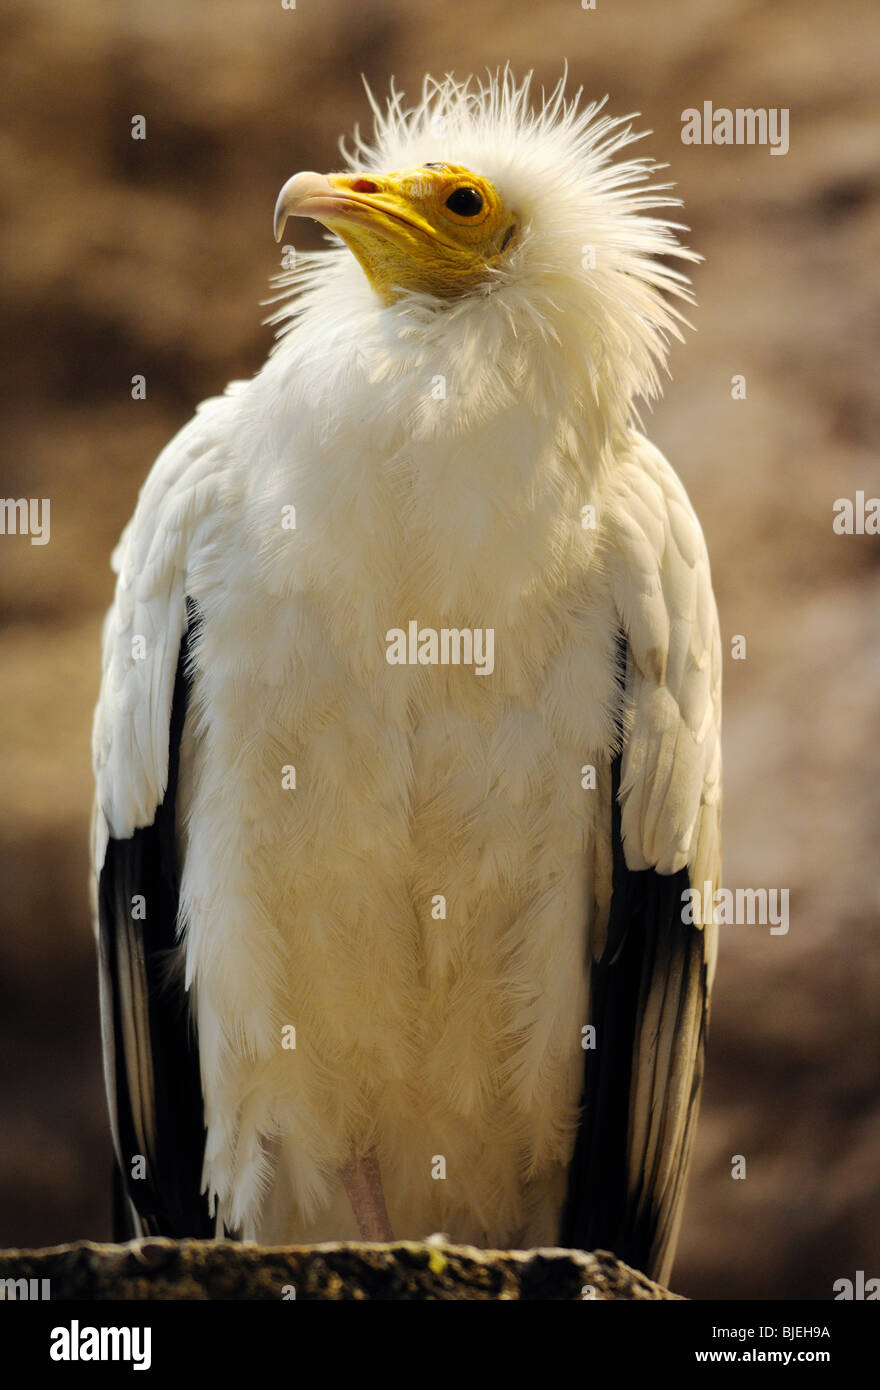 Egyptian Vulture (Neophron percnopterus), low angle view, close-up Stock Photo